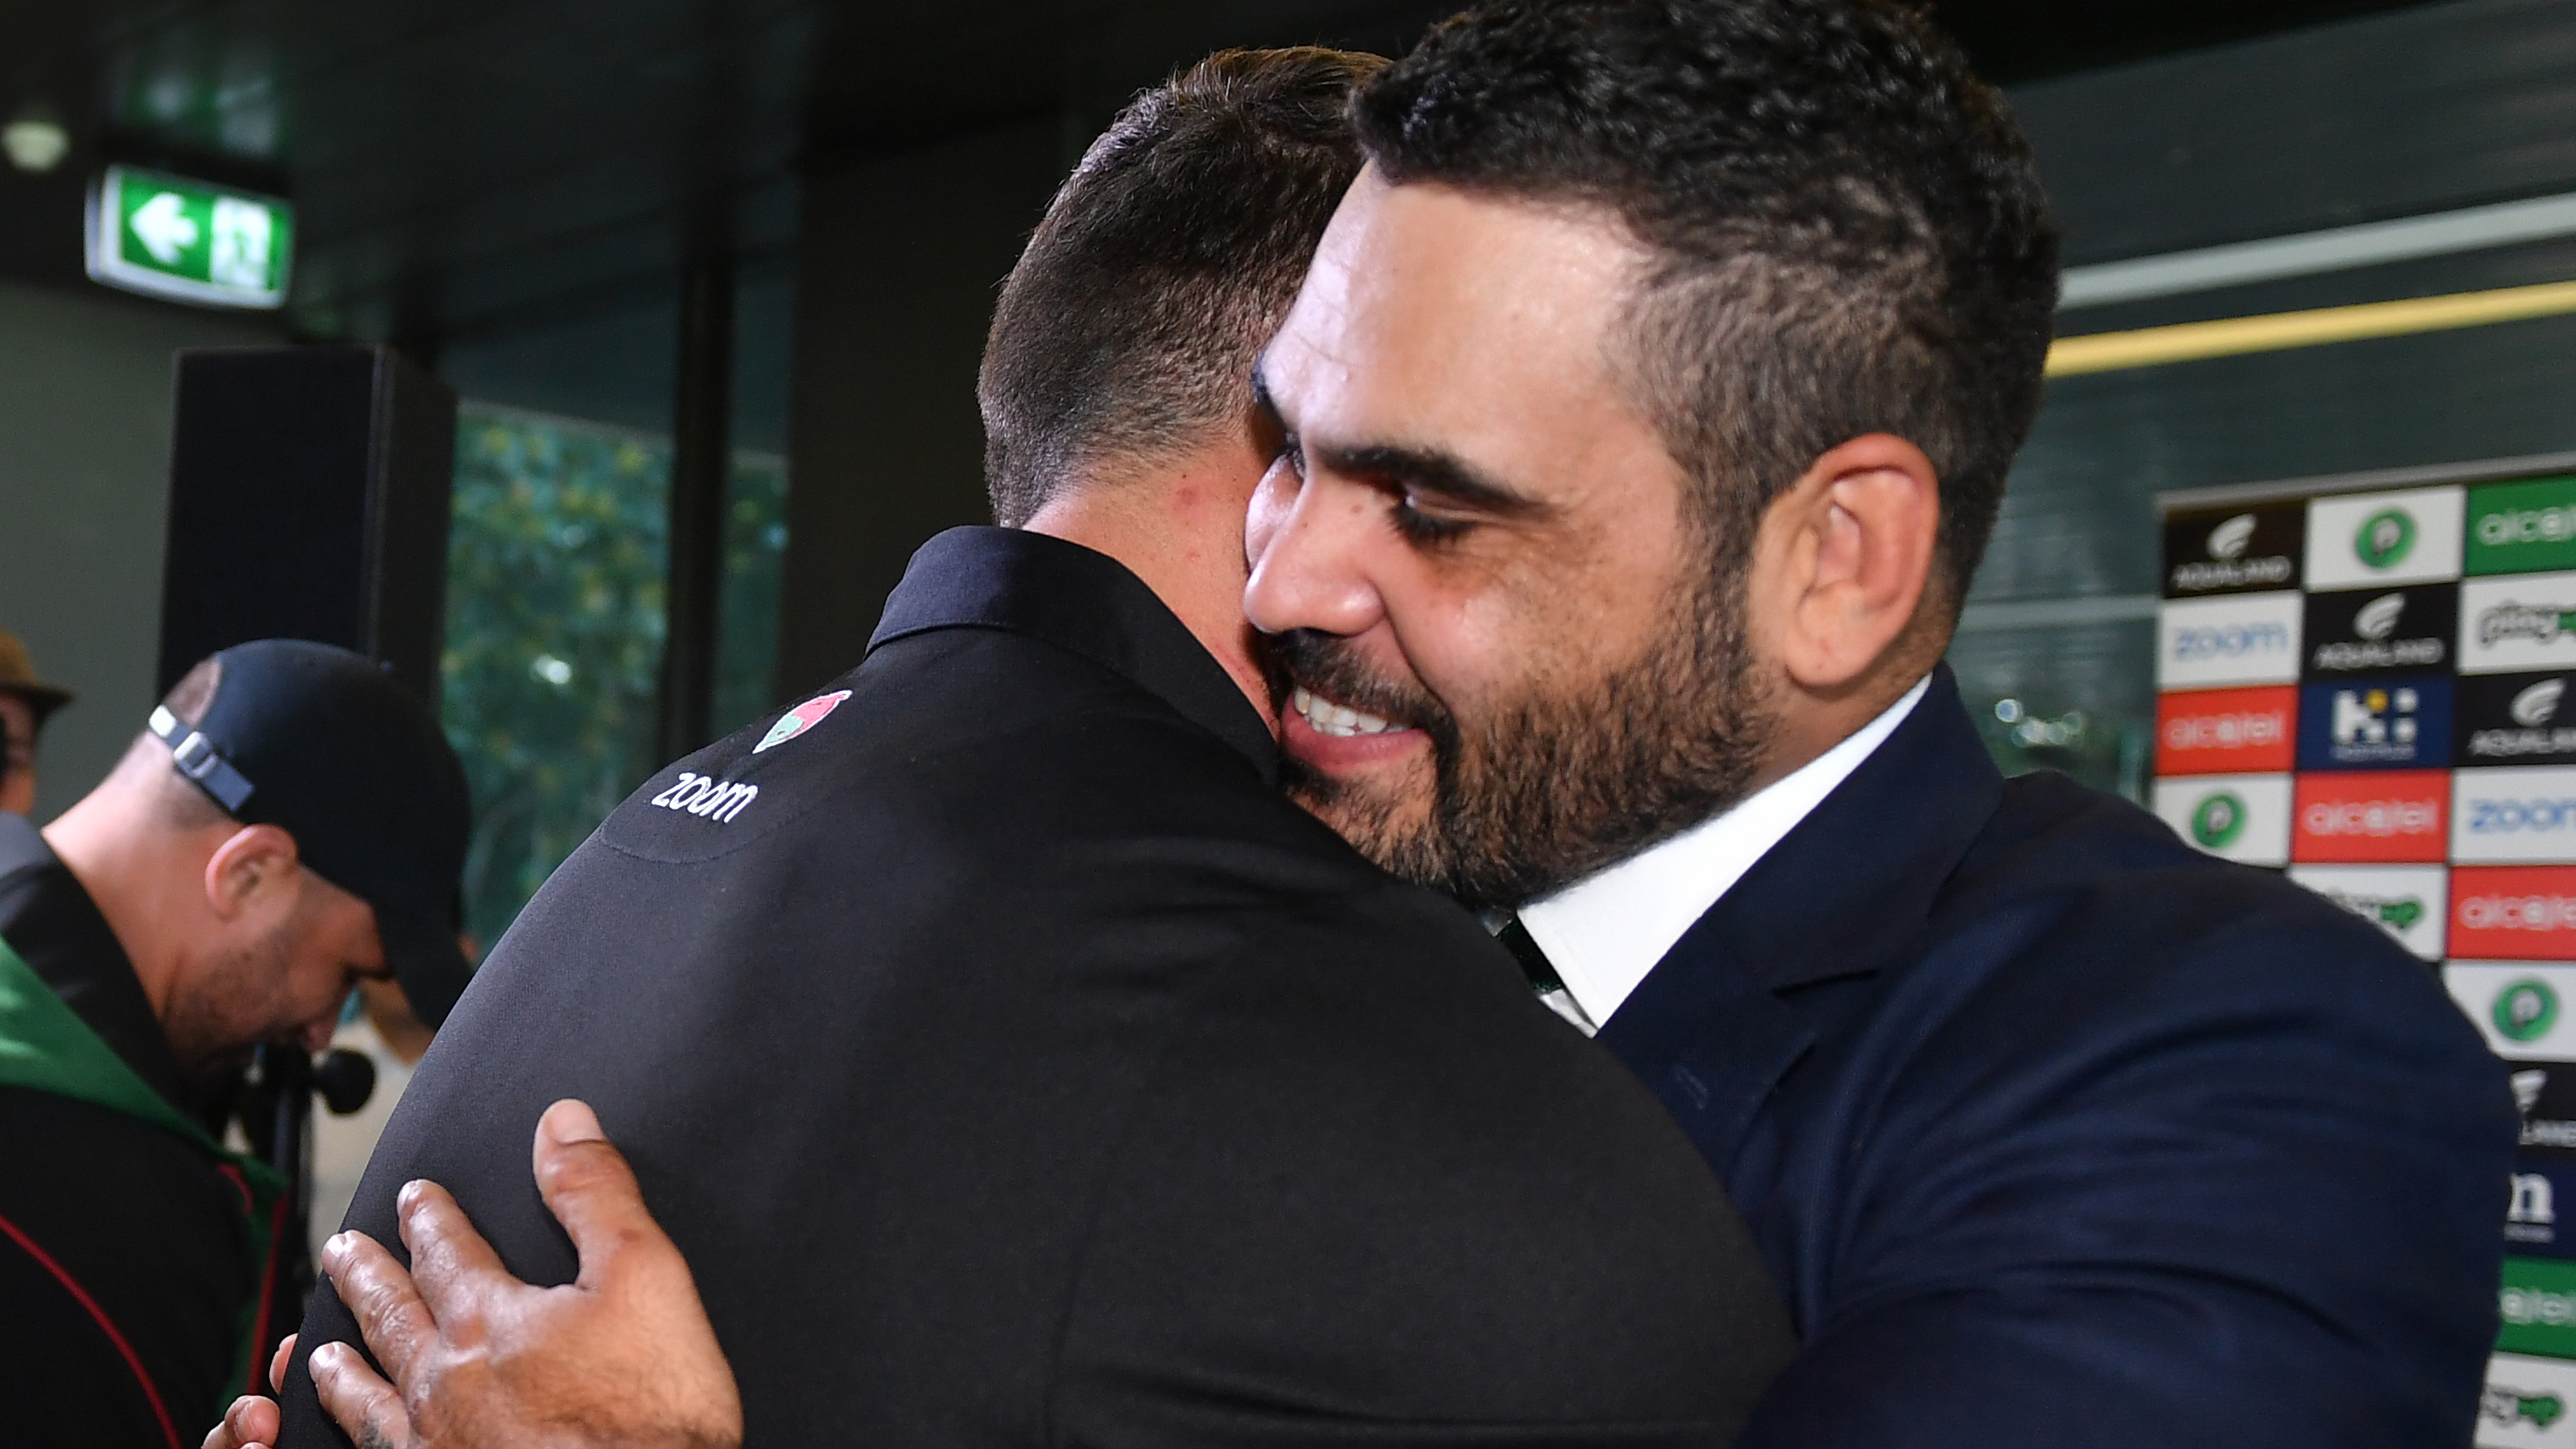 Greg Inglis is embraced at his retirement announcement.